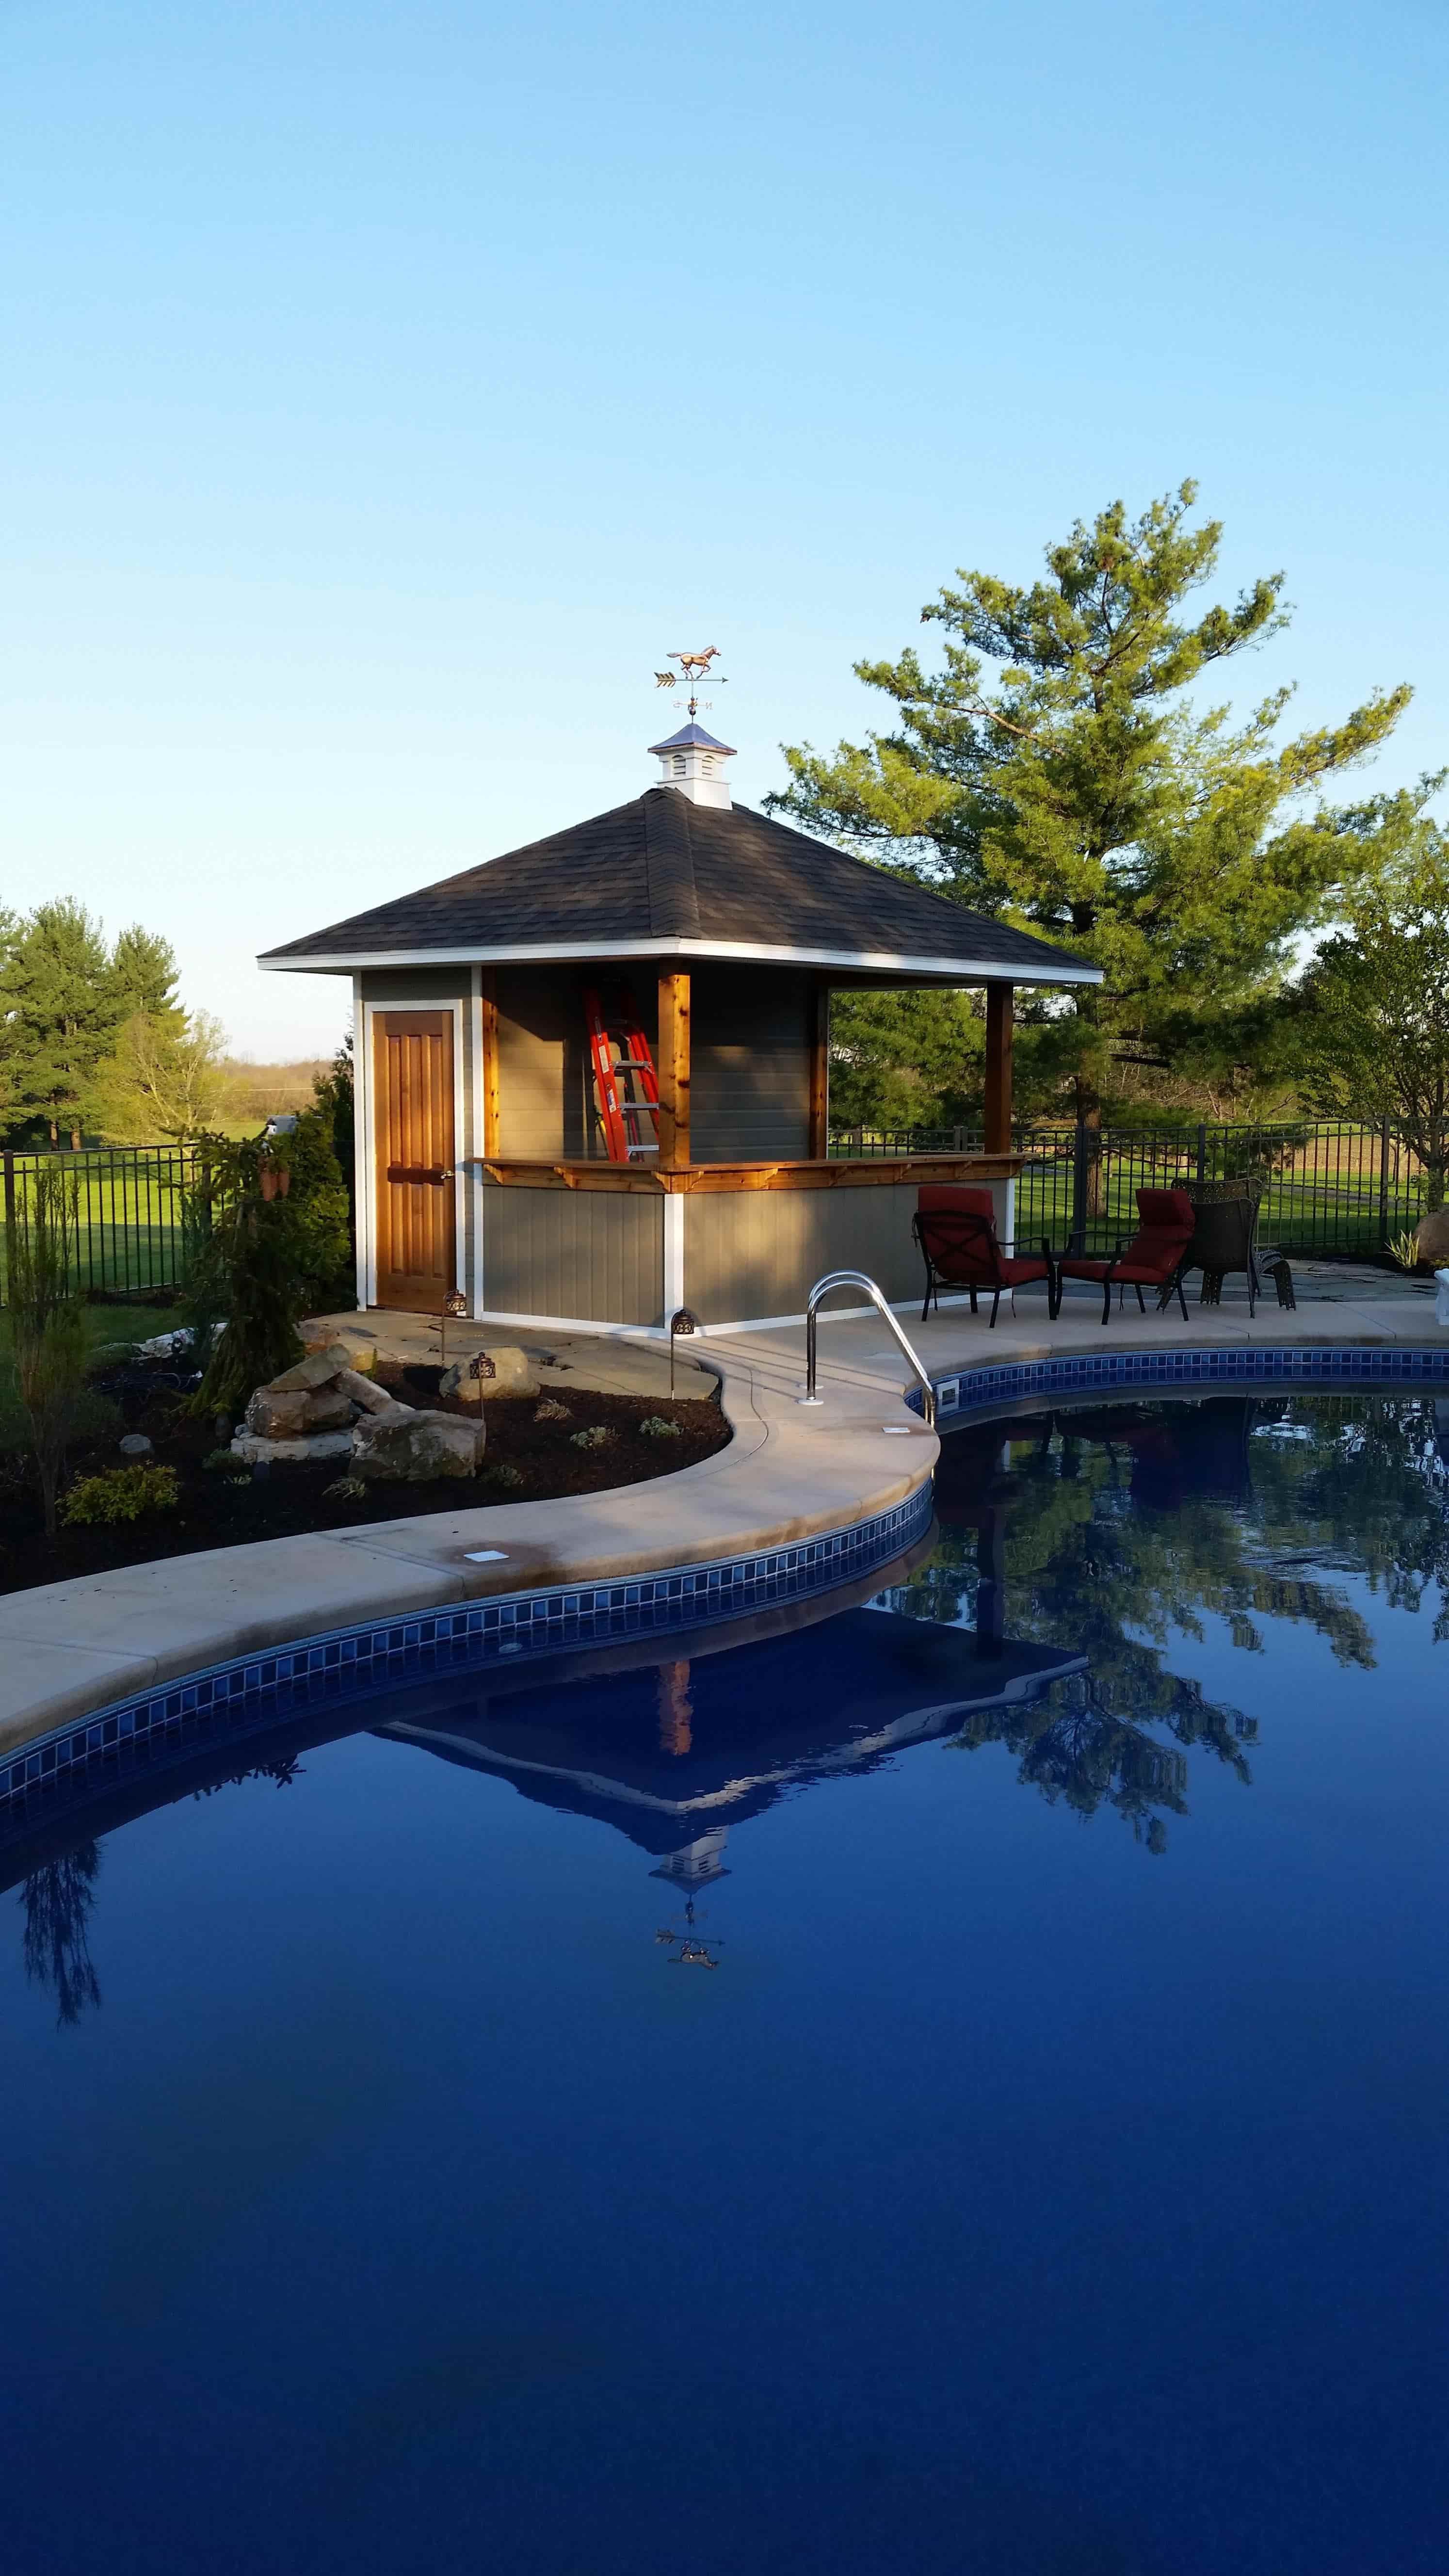 Barside pool cabana 10x12 with Vinyl curved cupola in Lebanon Ohio. ID number 194252-1.